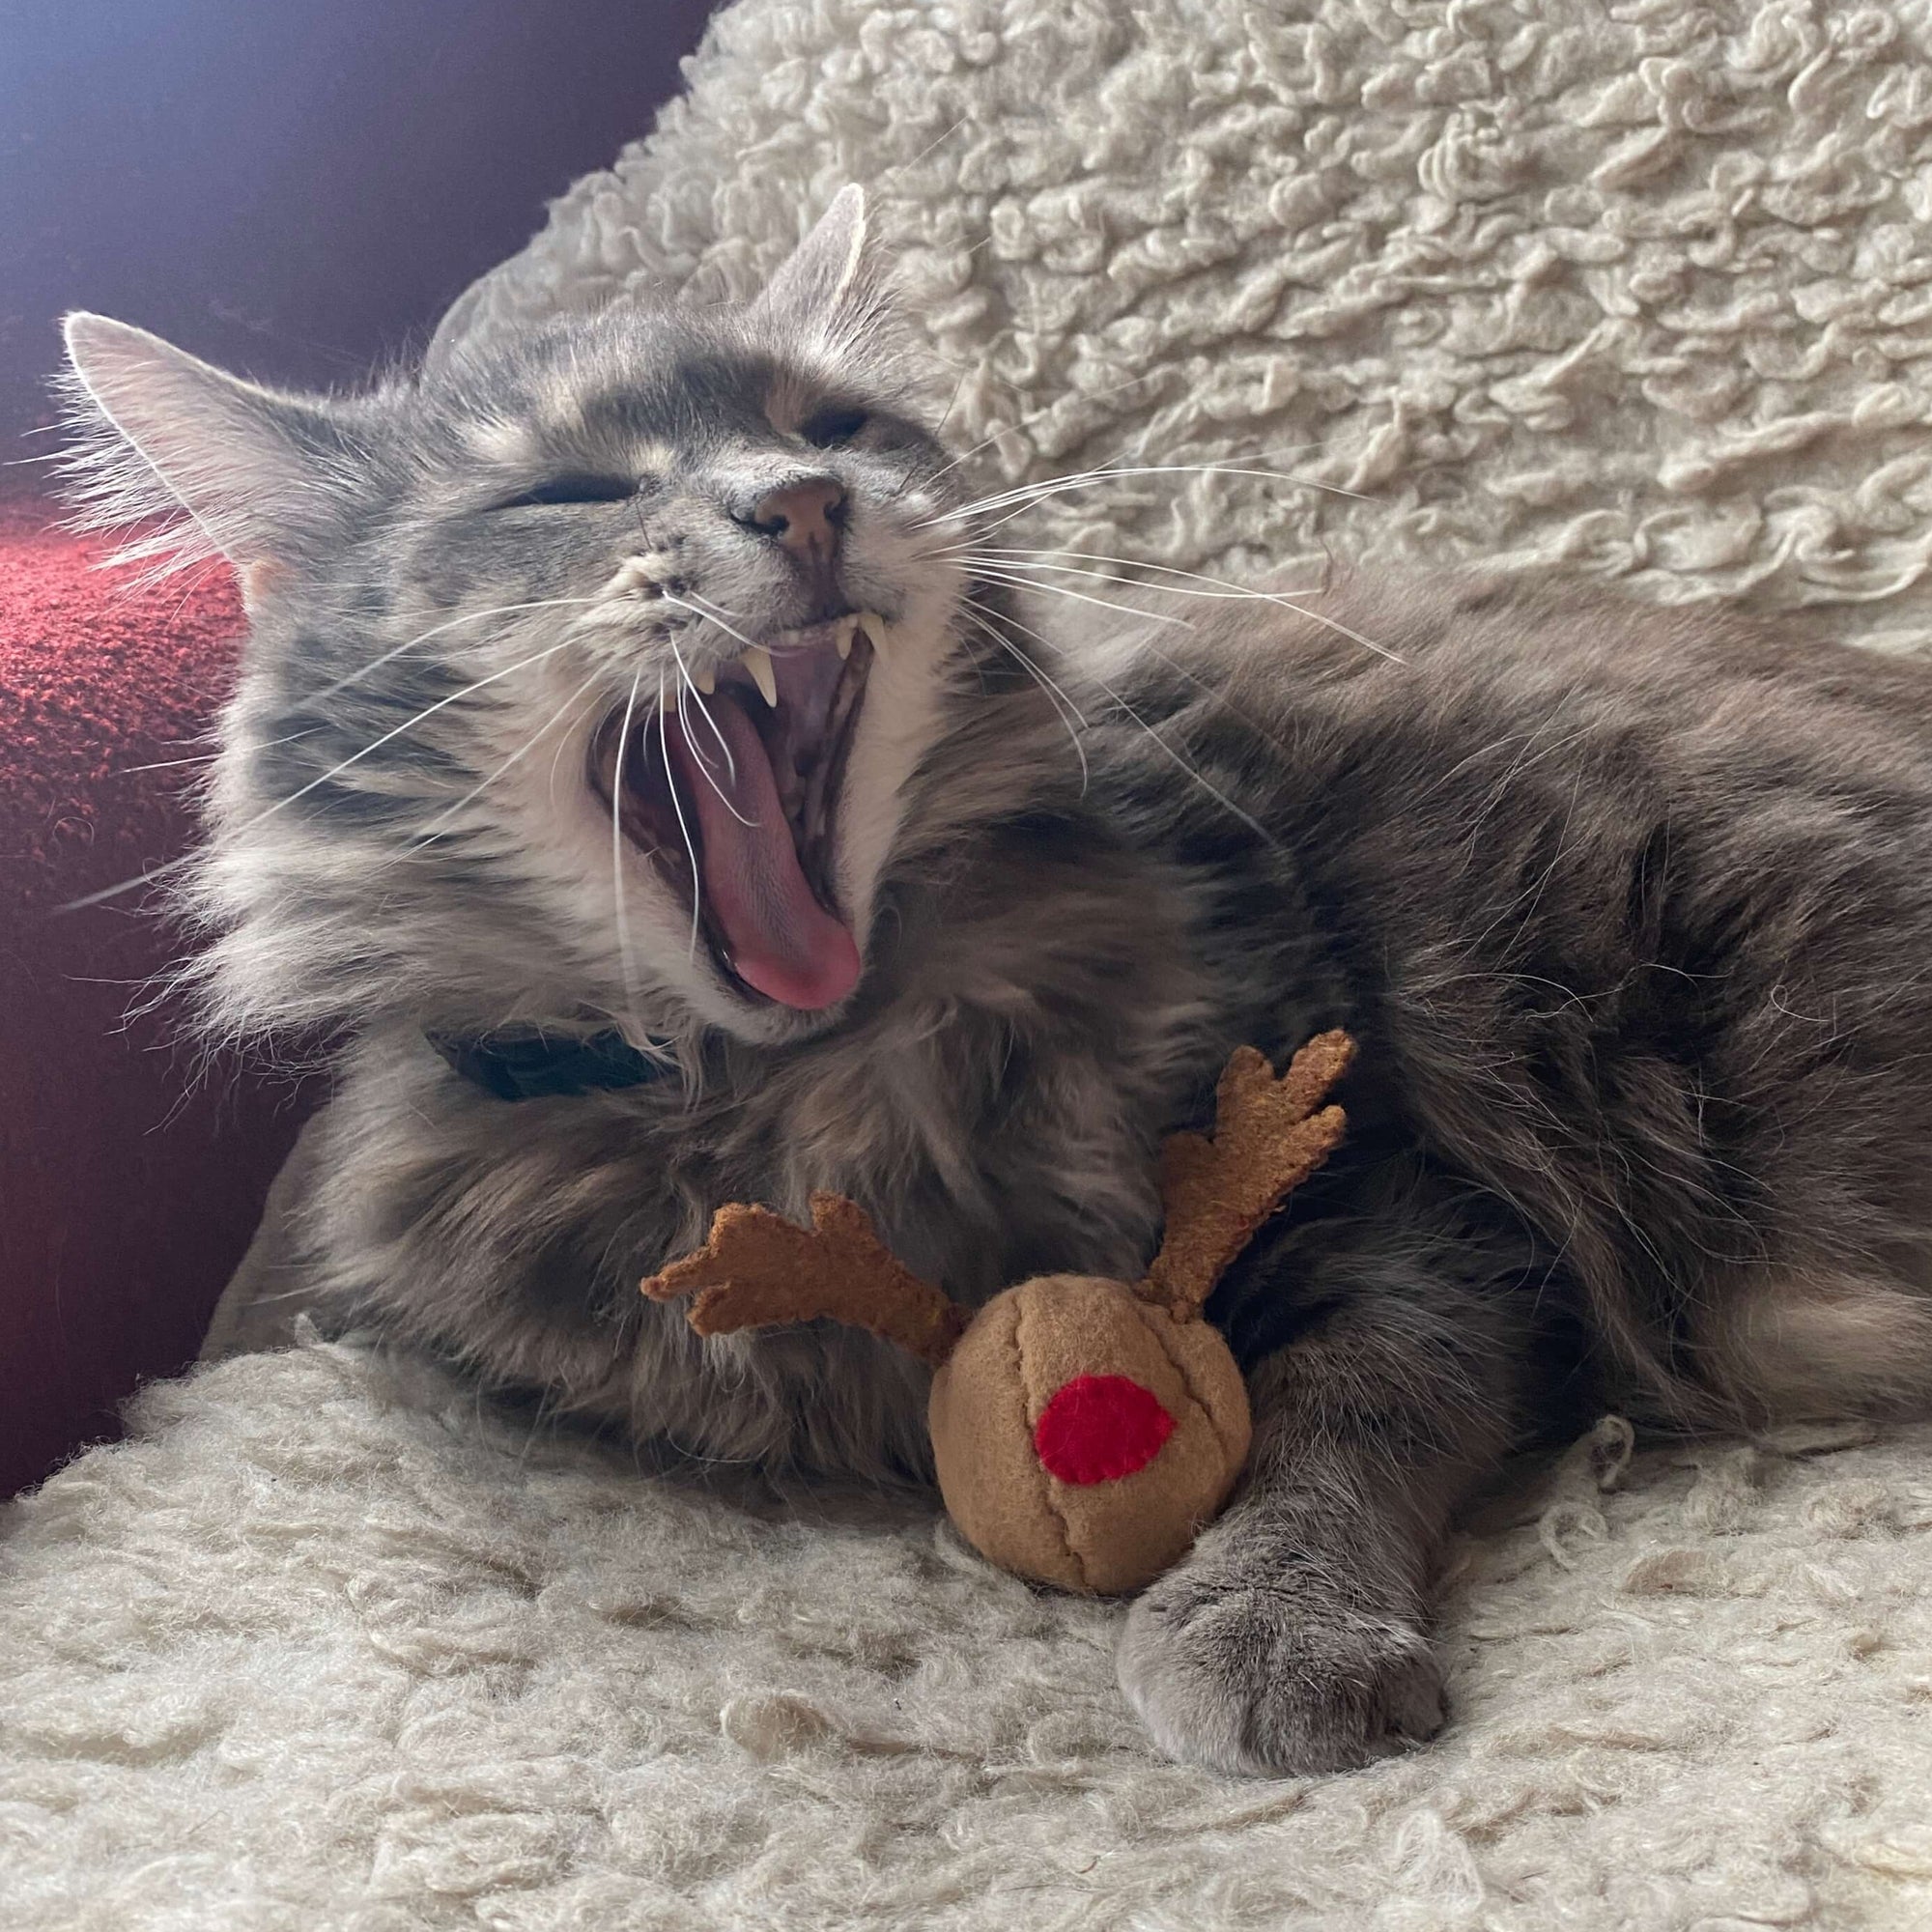 "Rudolph the Red-Nosed Reindeer" - Cat Toy